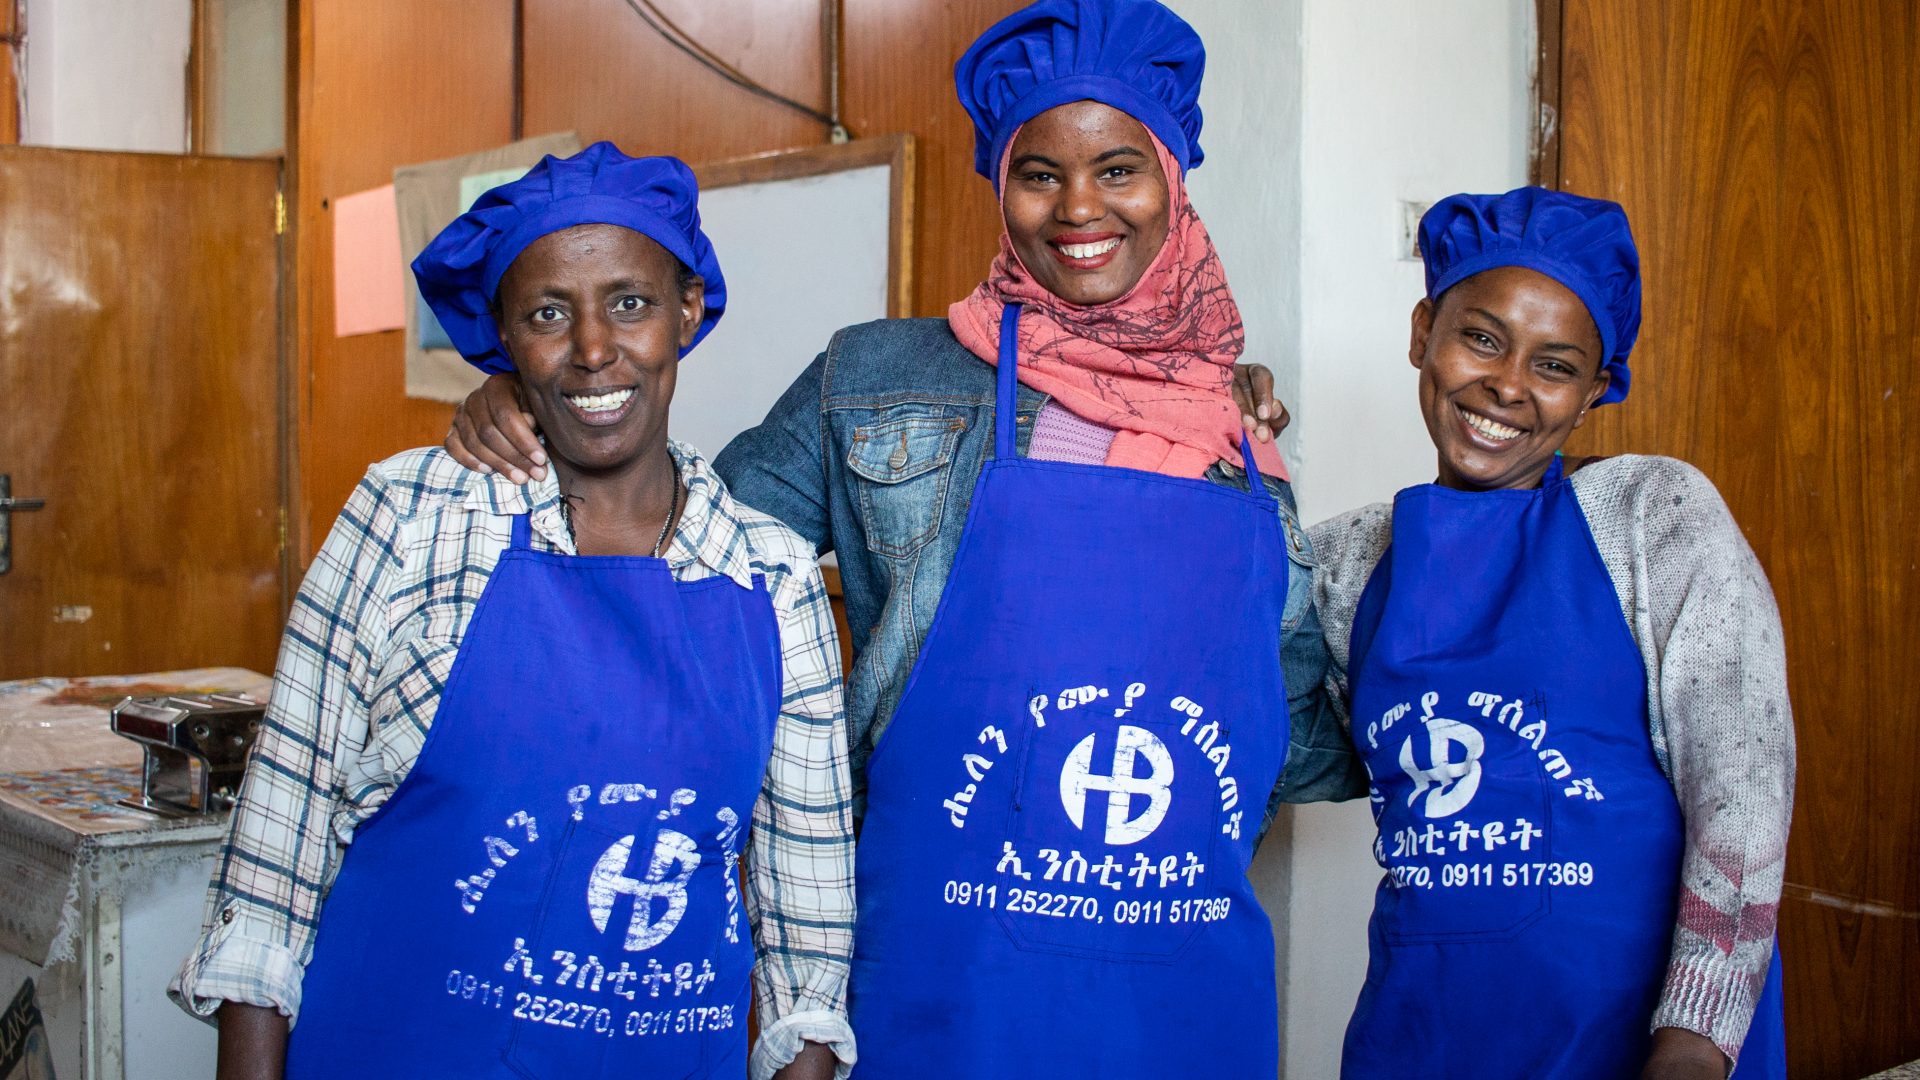 Three black women stand arm in arm, each wearing a royal blue apron and chef's hat.